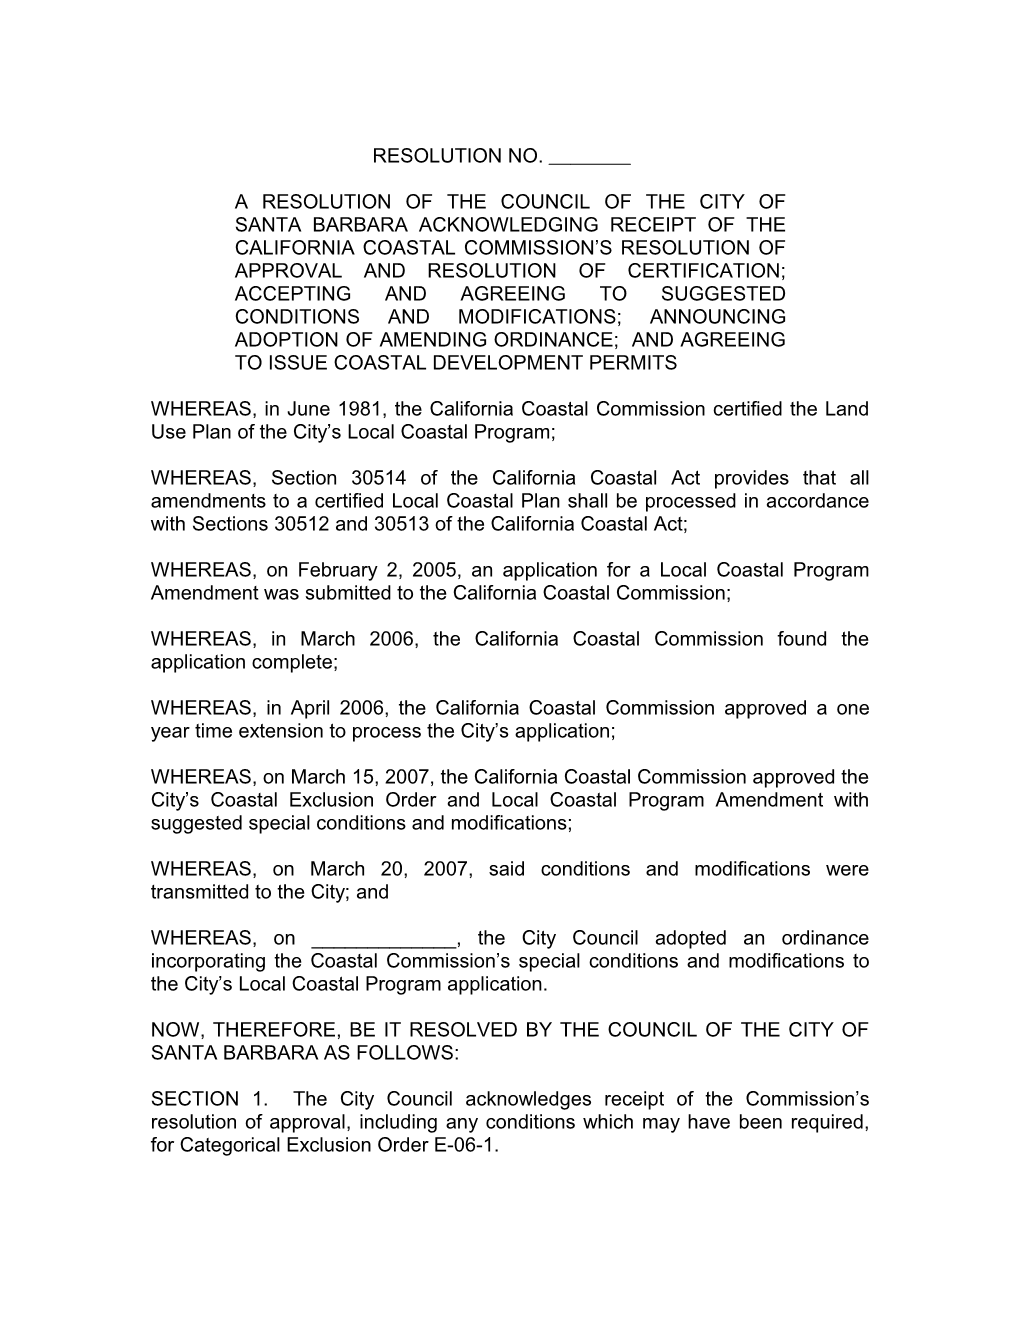 a Resolution of the Council of the City of Santa Barbara That Completes the Coastal Commission